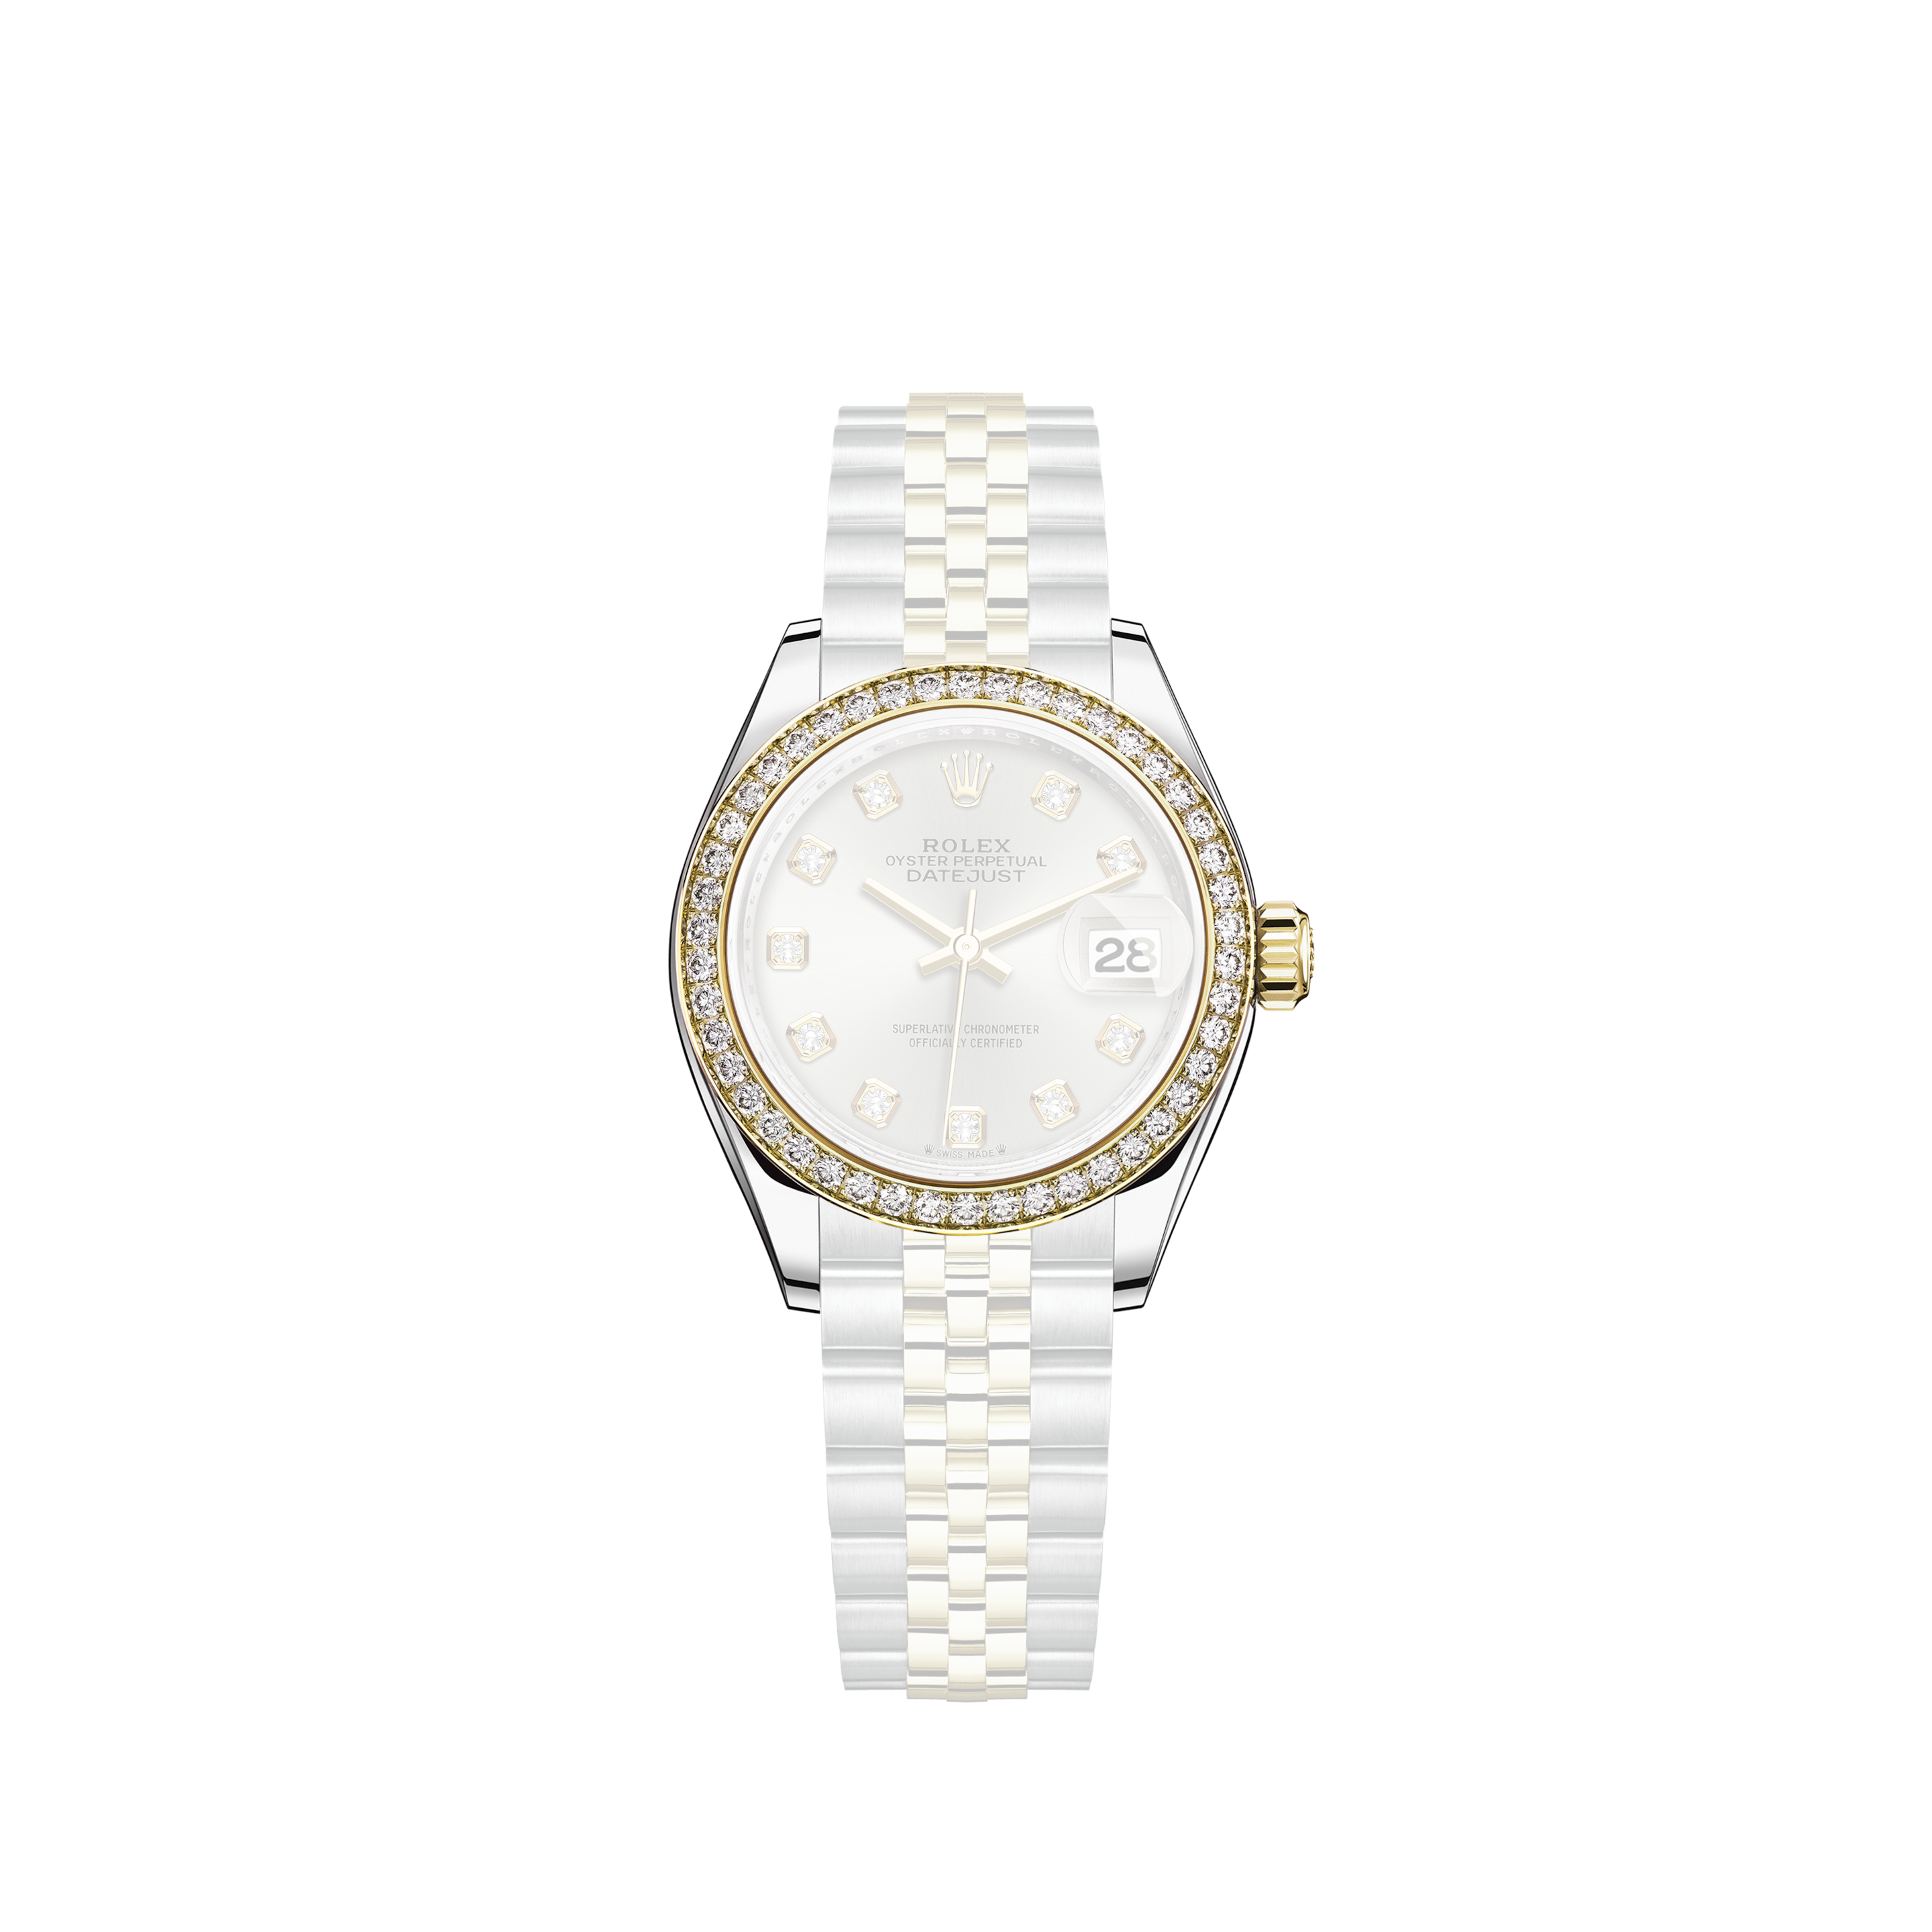 Rolex Women's Datejust Midsize Two Tone Fluted Black Index DialRolex Women's Datejust Midsize Two Tone Fluted Black Roman Dial